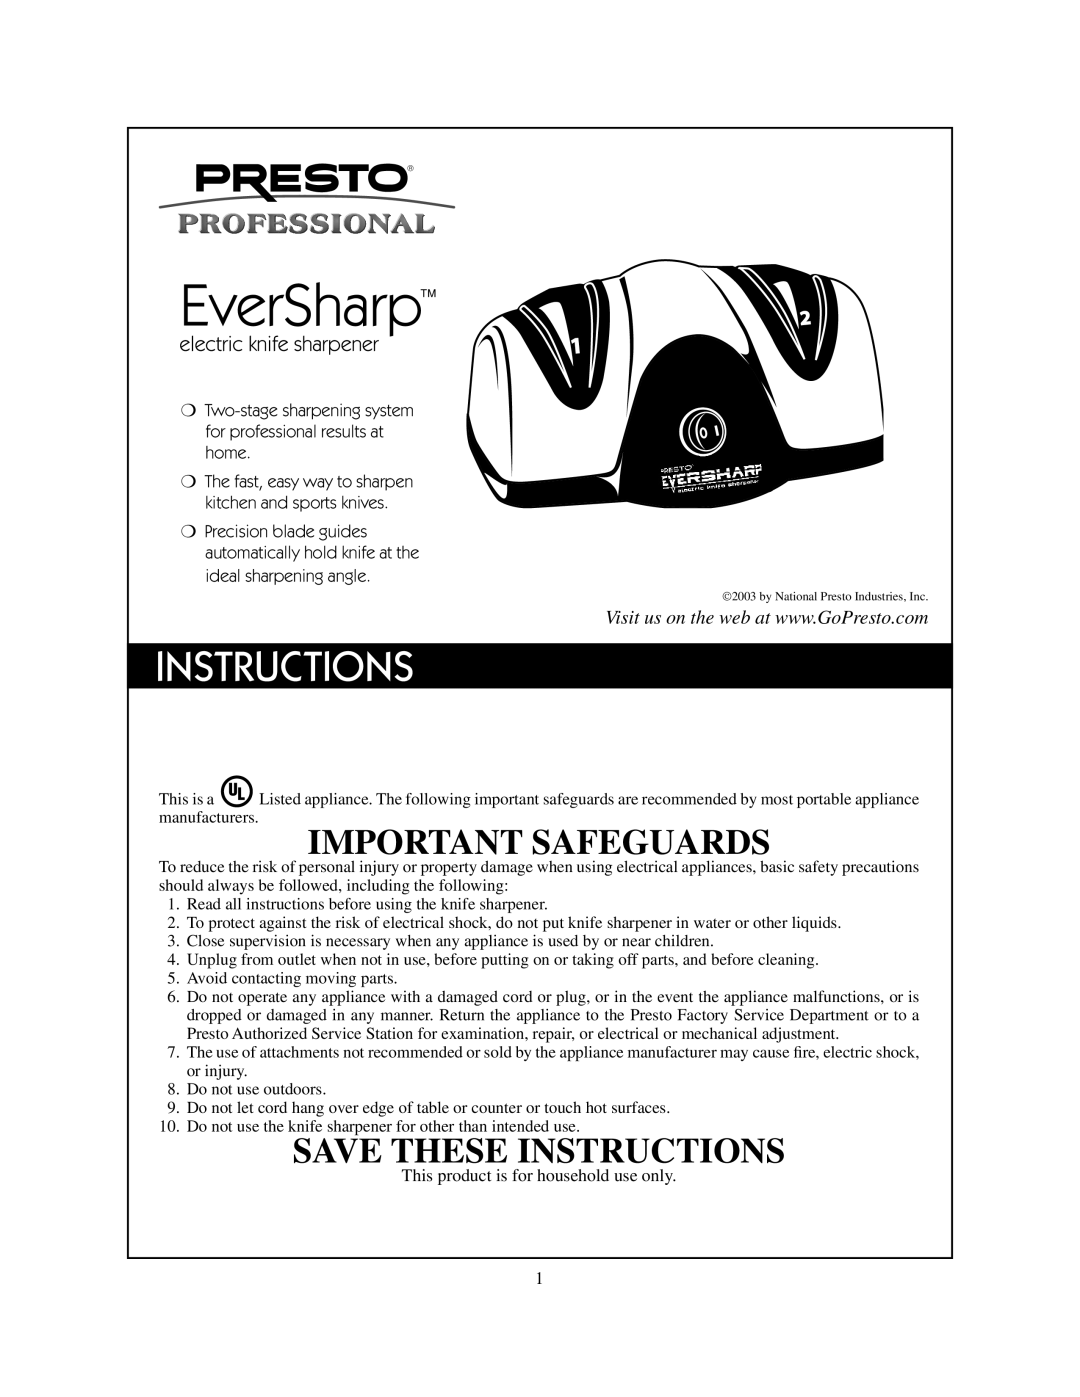 Presto 8800 manual EverSharp, Important Safeguards, Save These Instructions, electric knife sharpener 